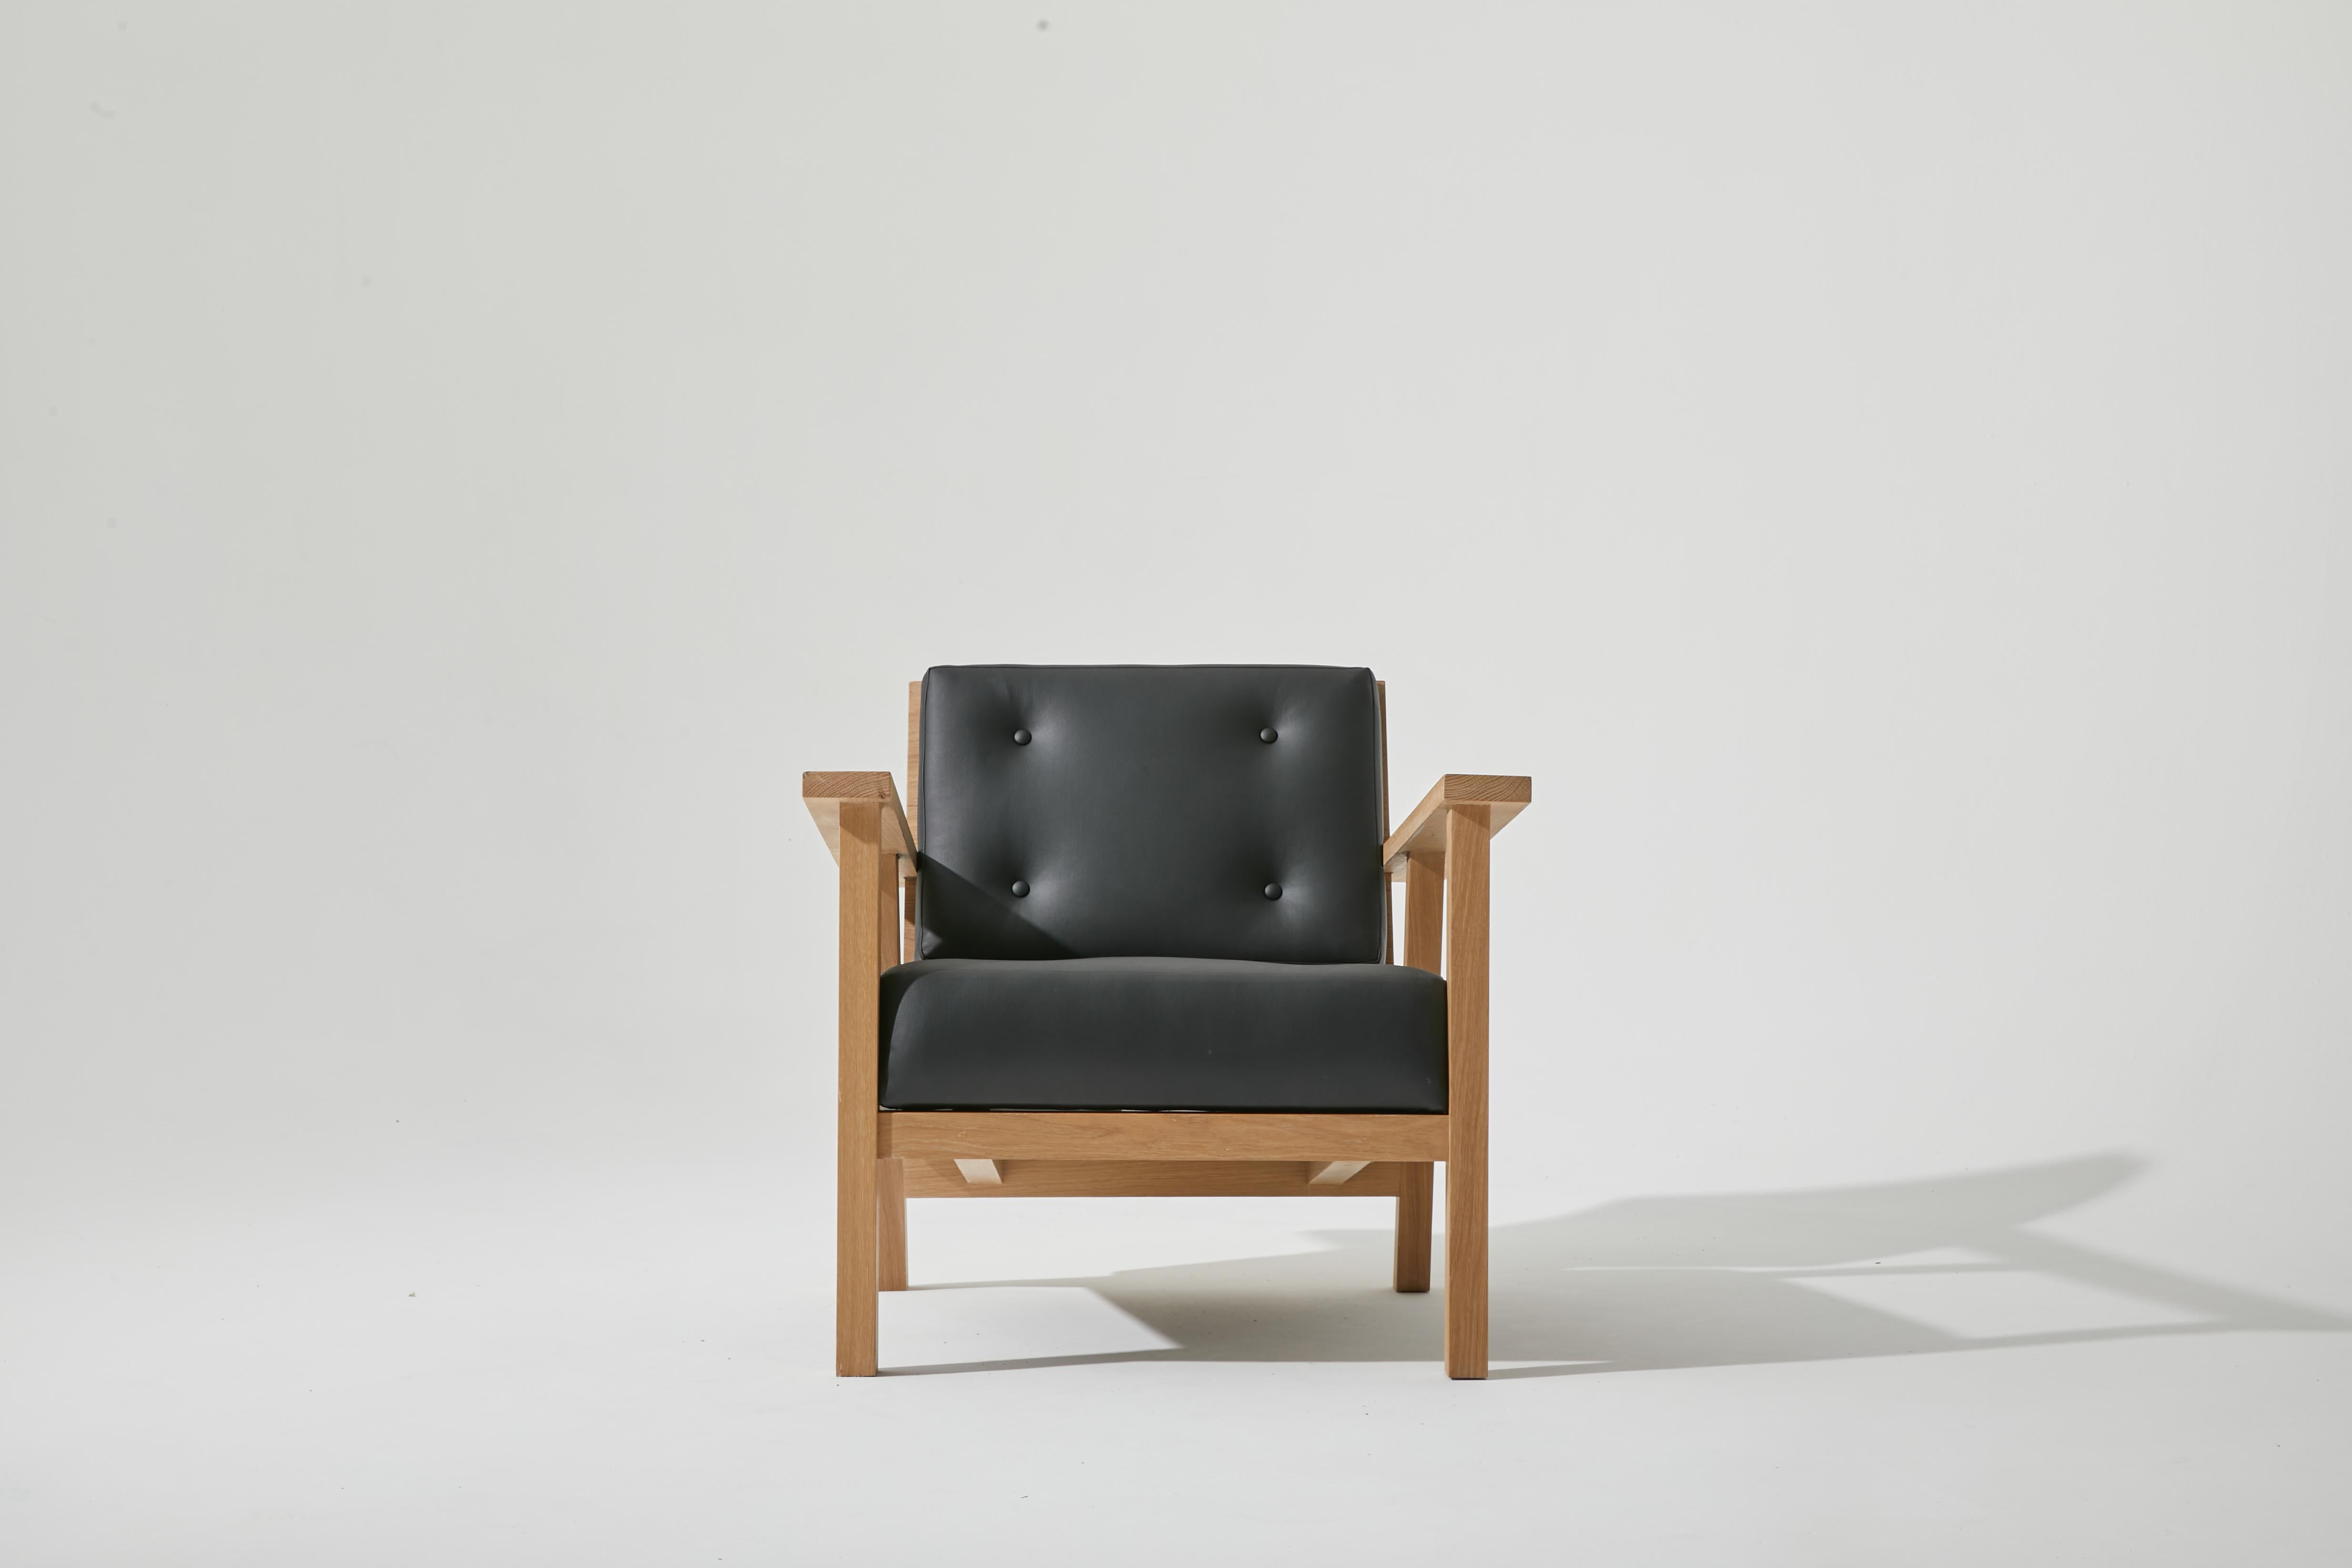 The SH01 Chair was designed at just the right angle for lounging or working. I went through many prototypes and styles to find the fit that felt just right with the best support and comfort. It is made using traditional mortise and tenon joinery